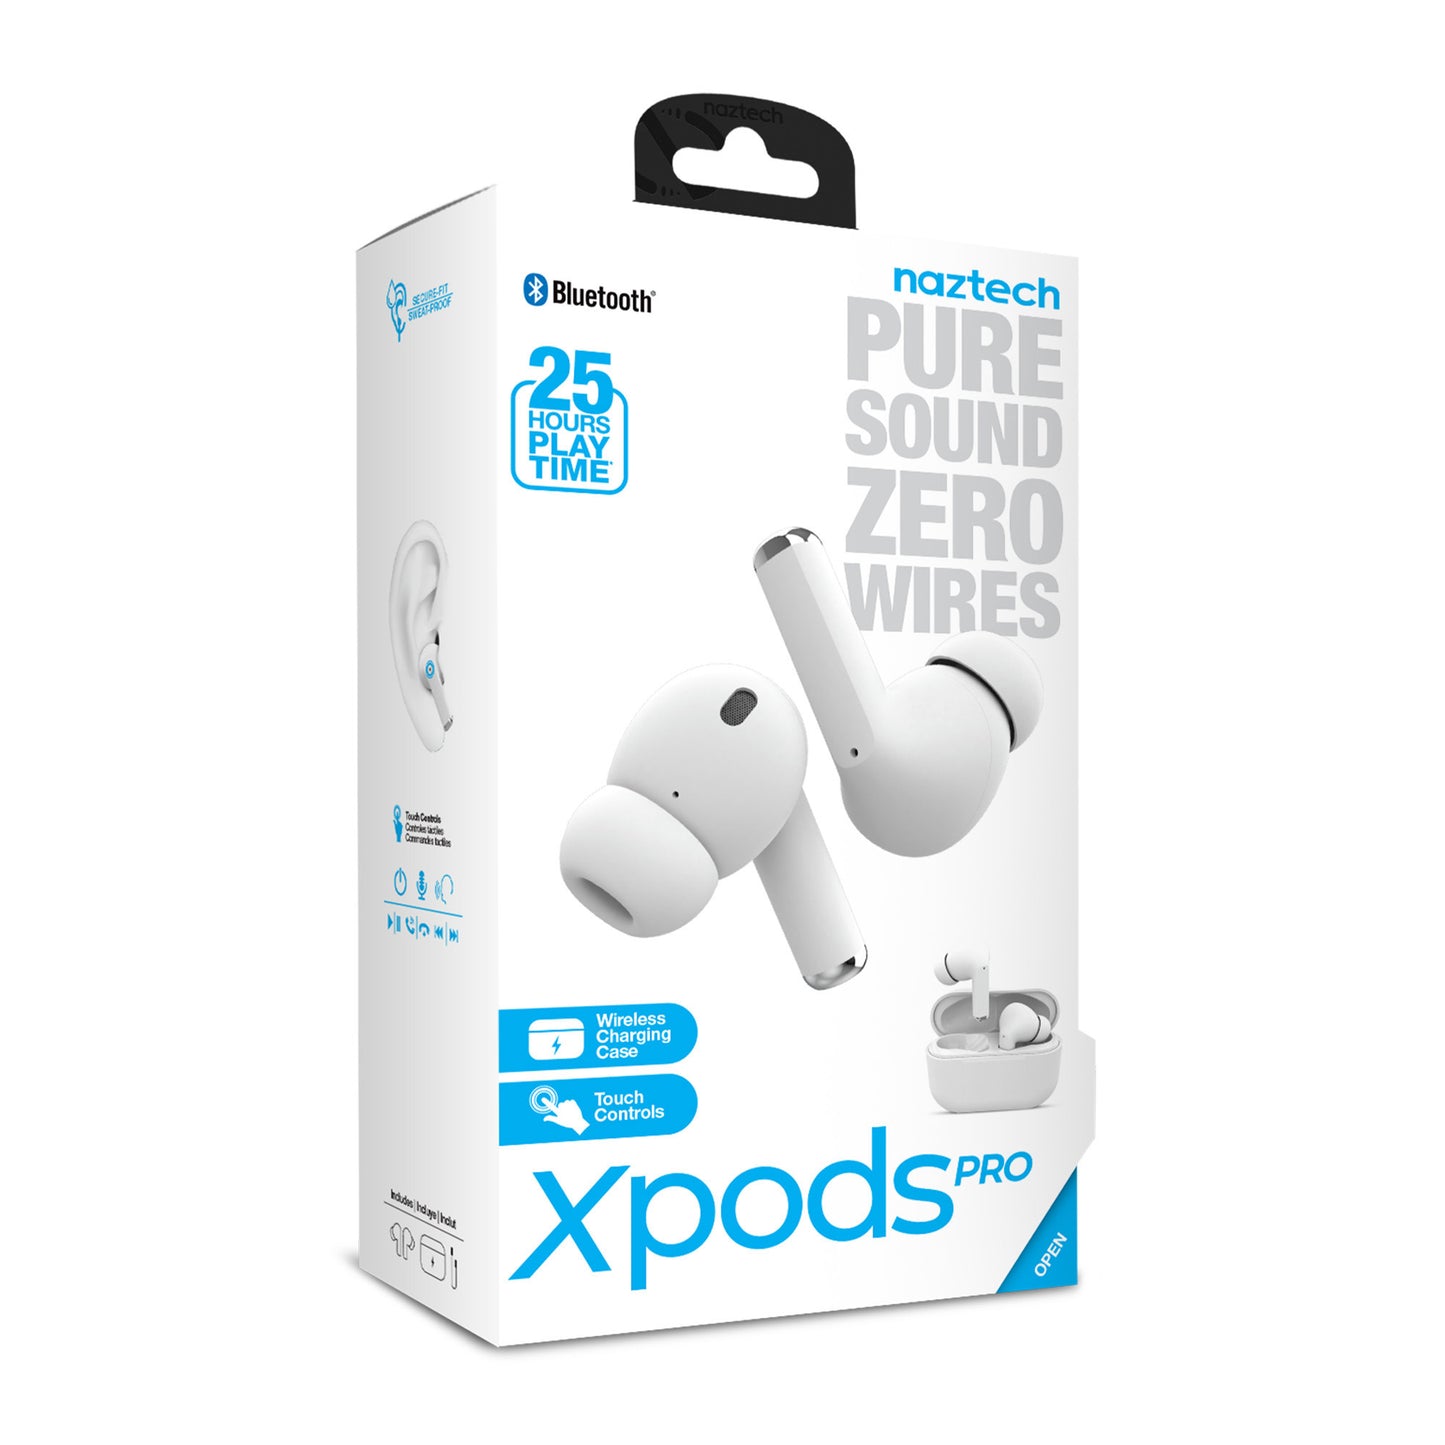 Naztech White Xpods Pro True Wireless Earbuds with Wireless Charging Case - 15-08487